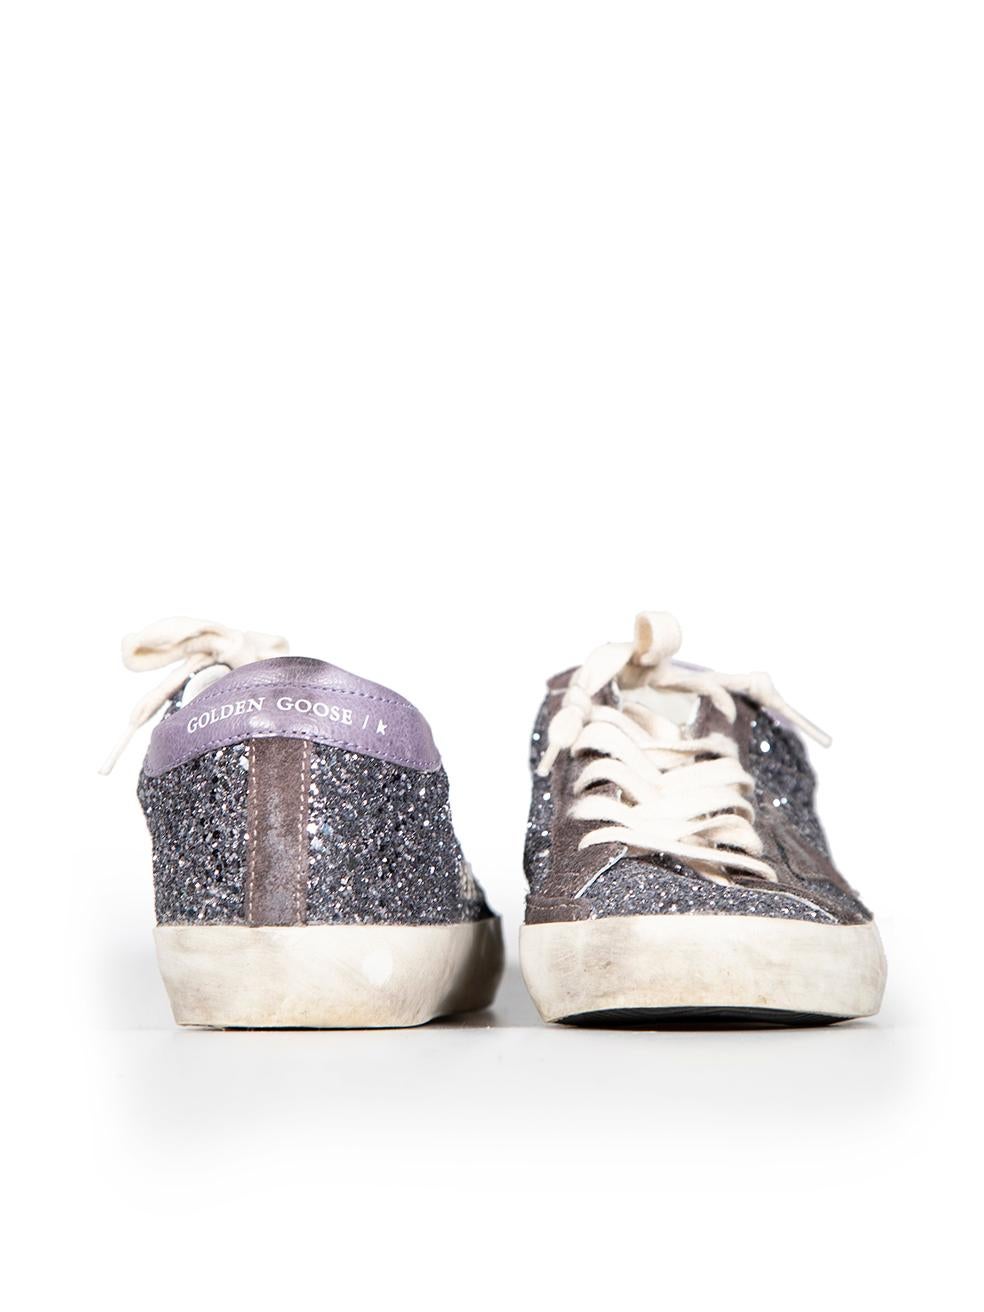 Golden Goose Navy Glitter Superstar Trainers Size IT 38 In Good Condition For Sale In London, GB